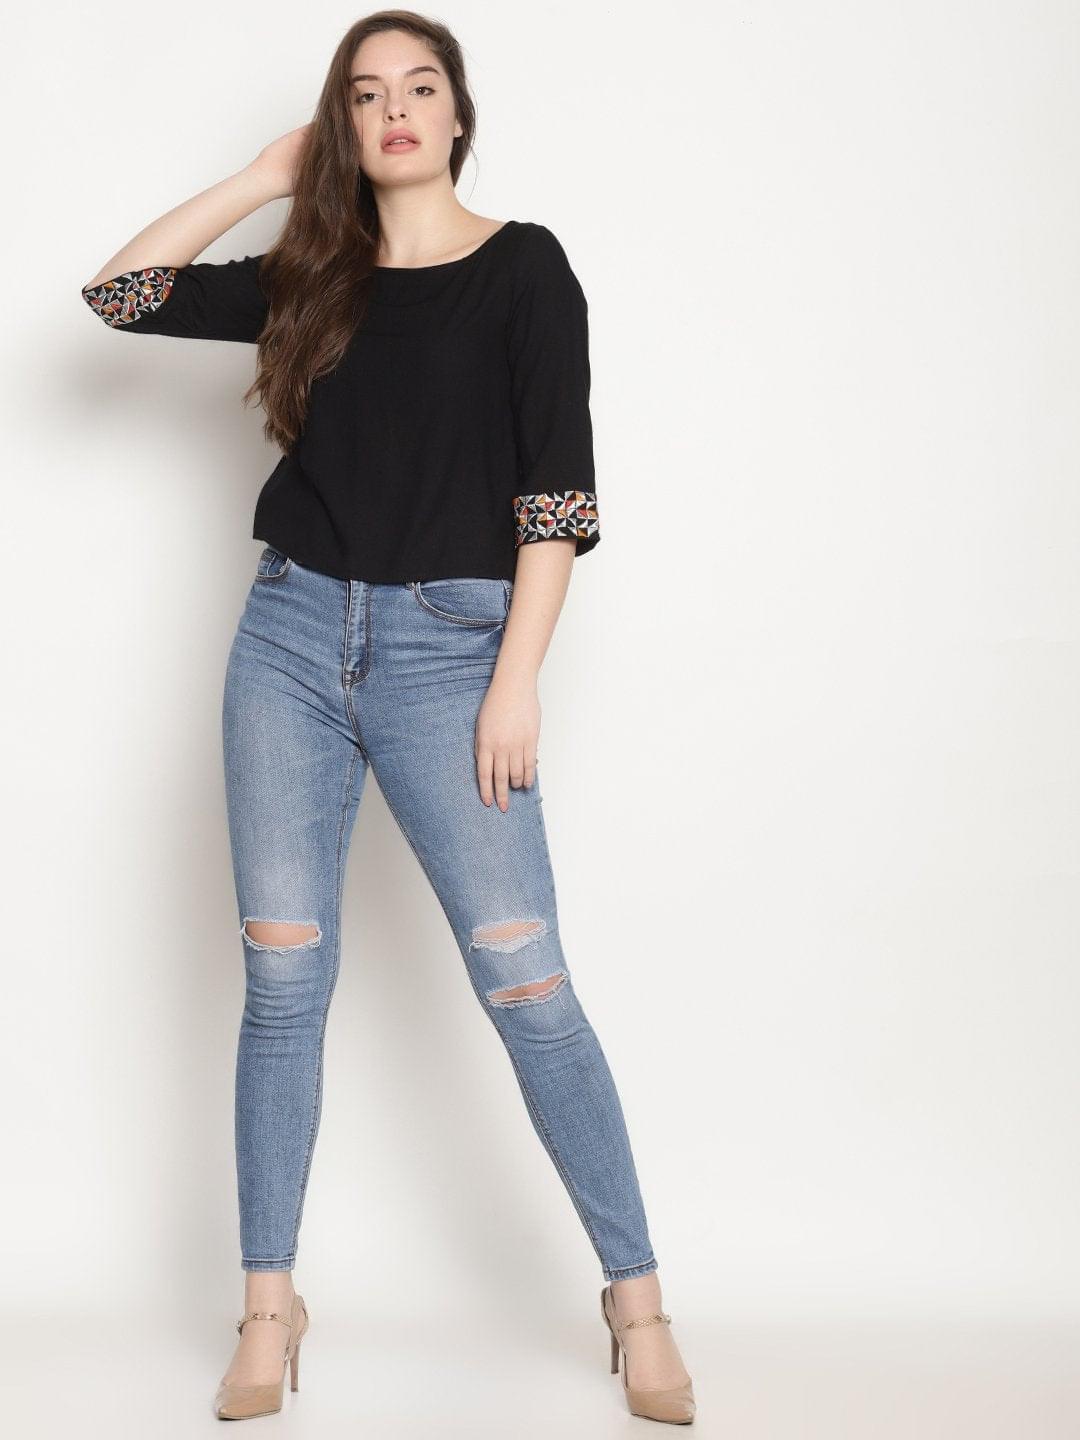 black-embroidered-top